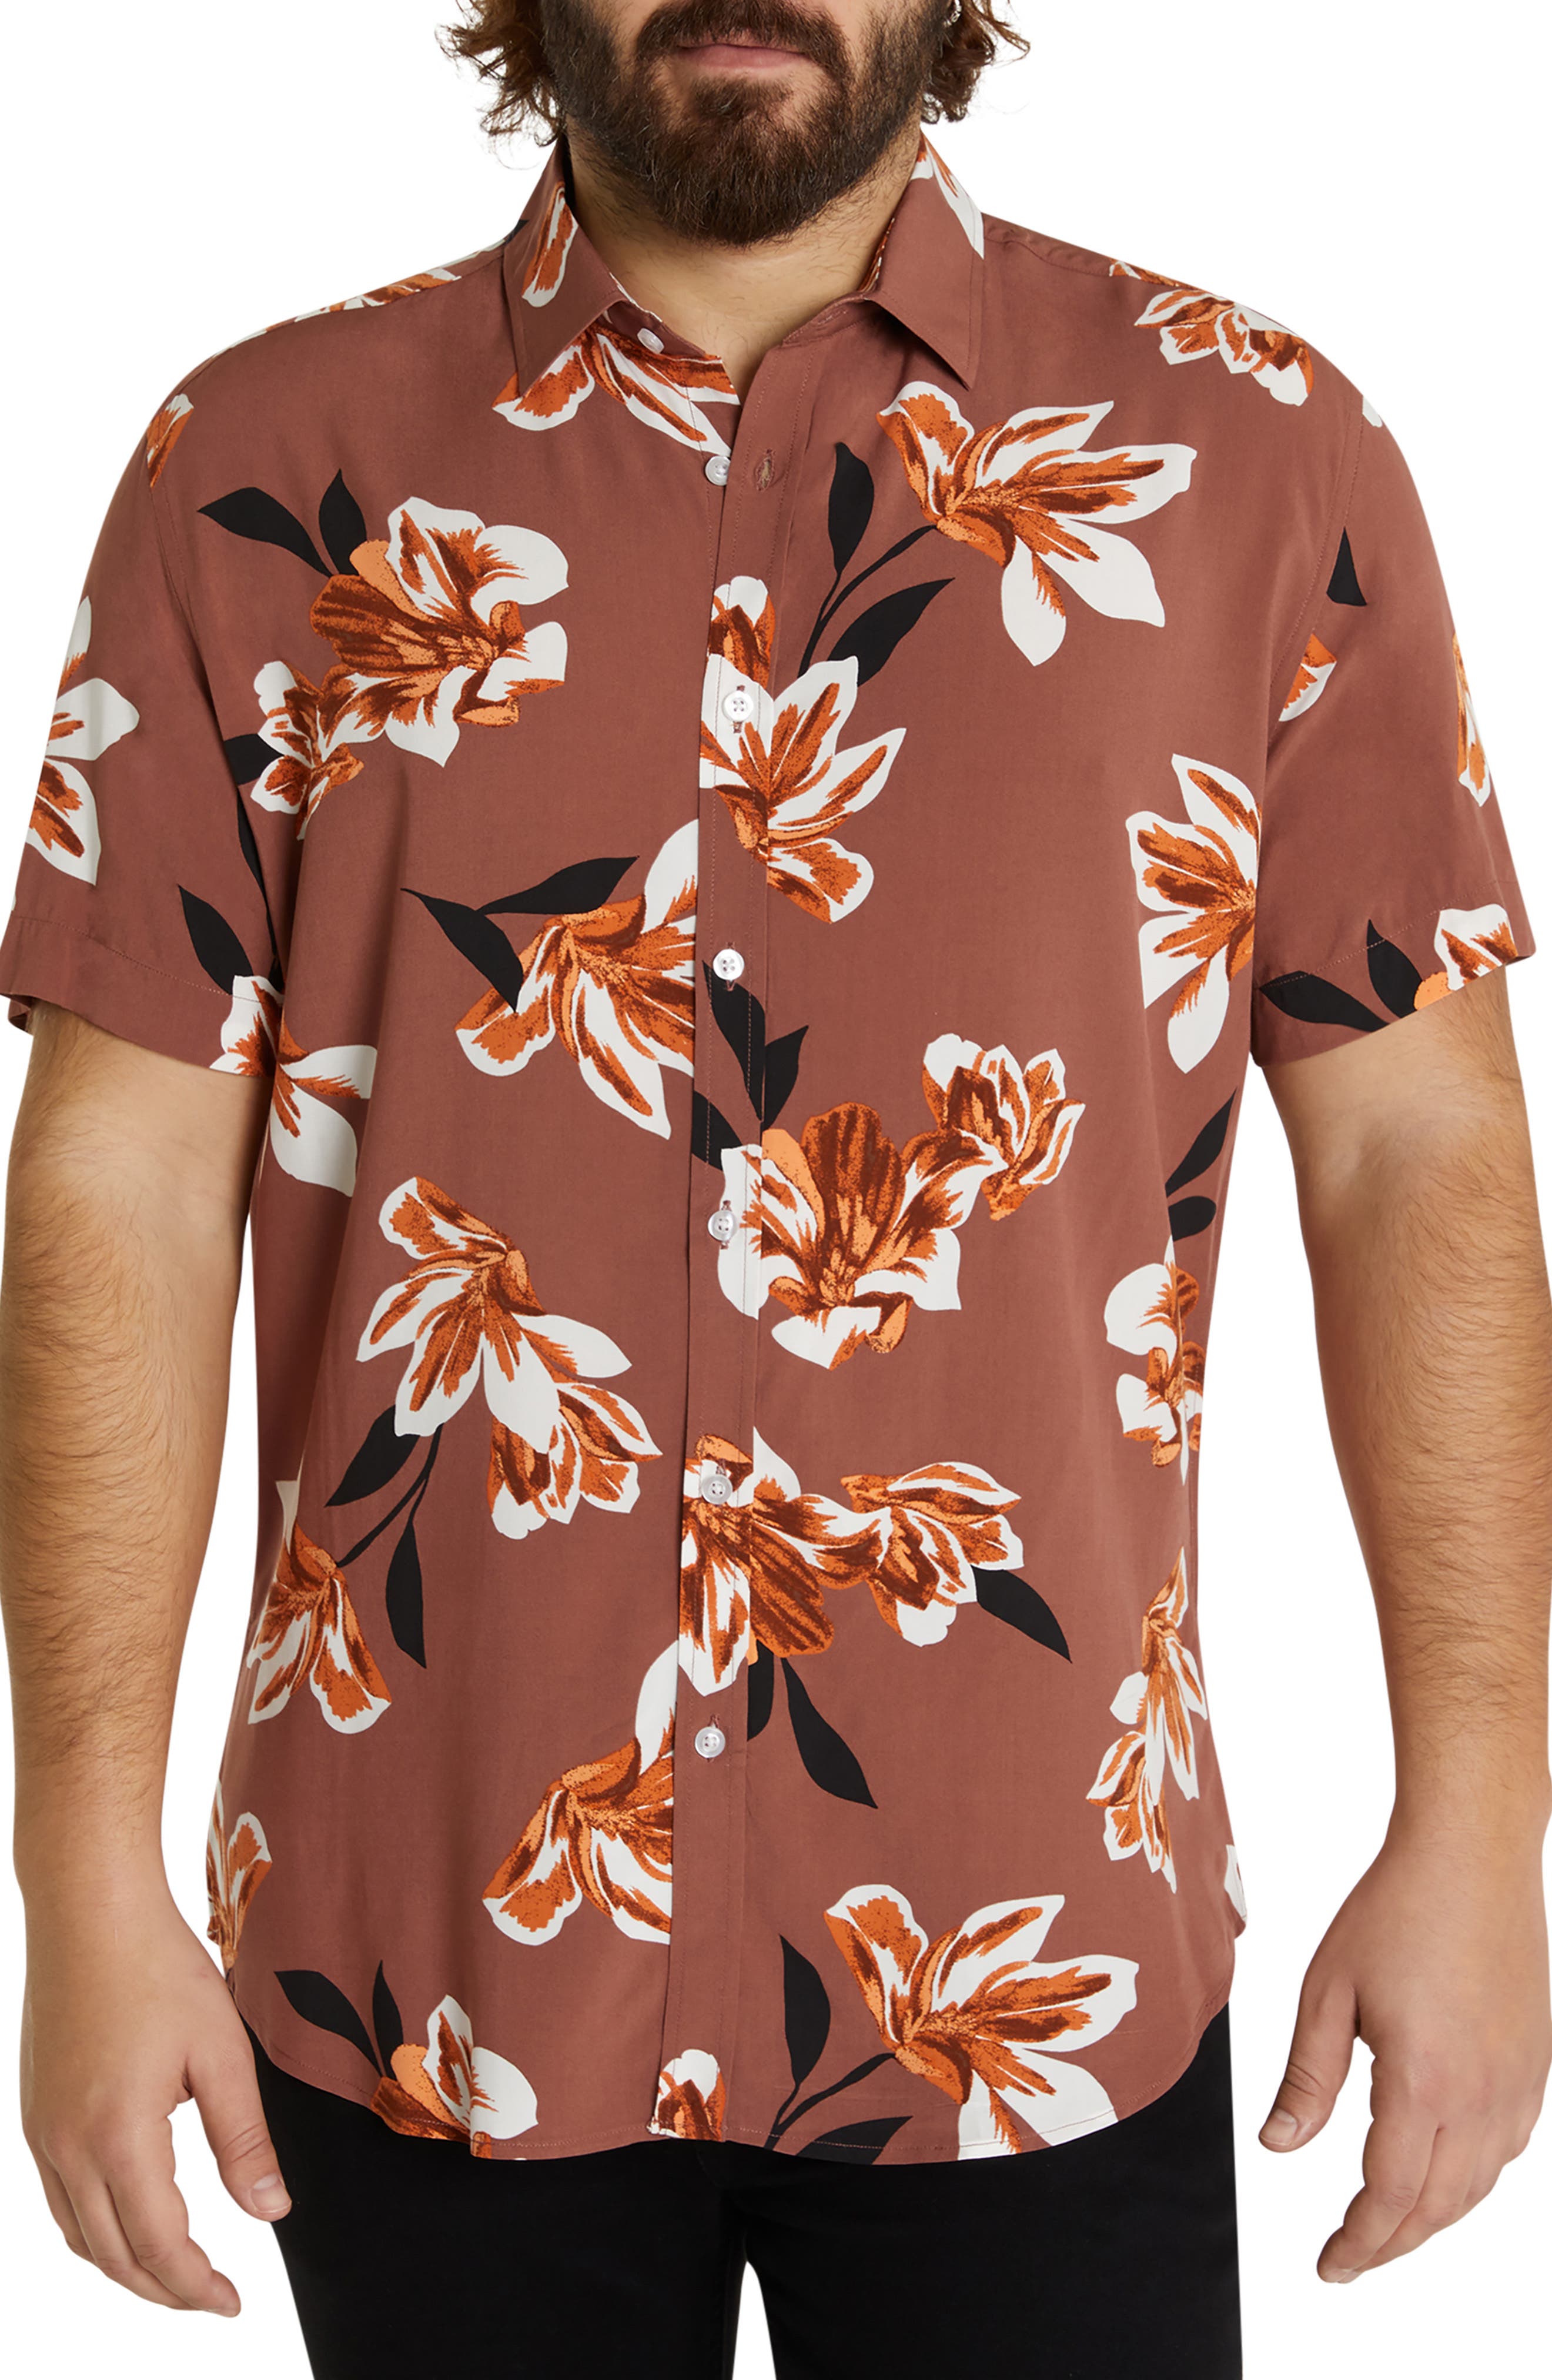 Johnny Bigg Reed Floral Short Sleeve Button-Up Shirt in Brick